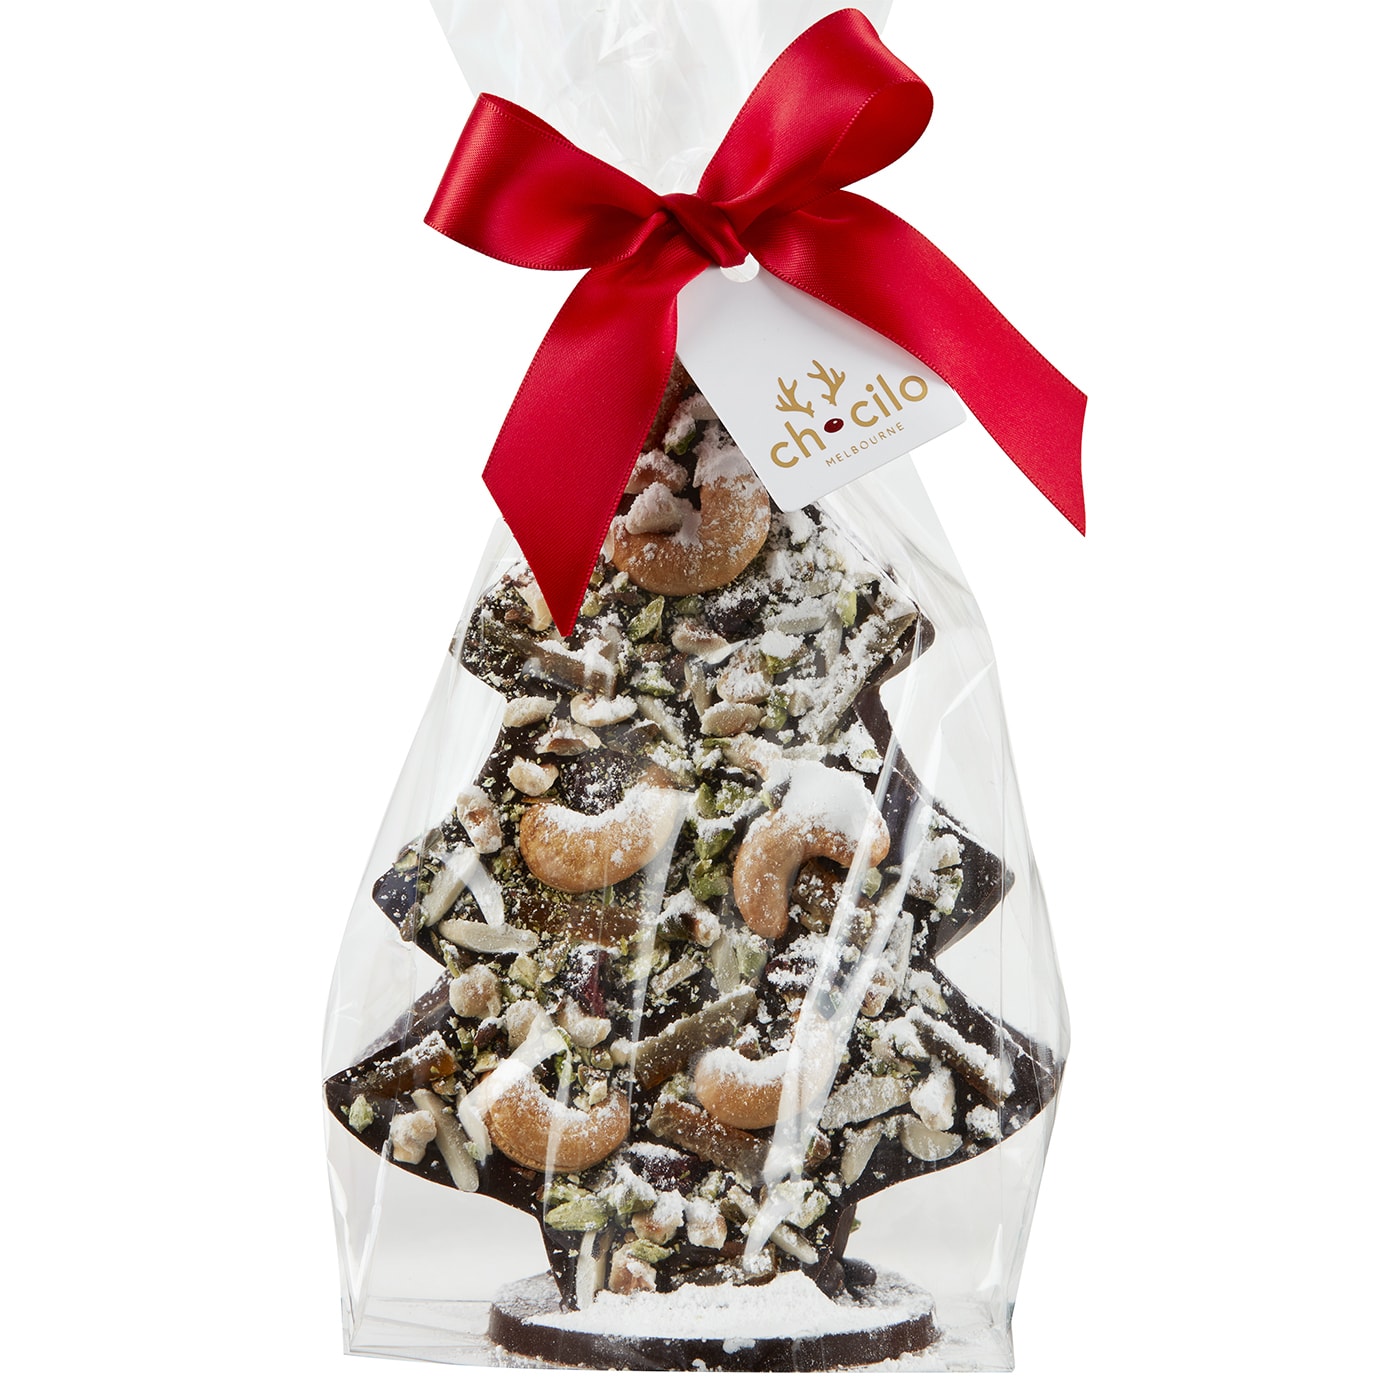 Chocilo Melbourne Milk Chocolate with fresh fruit and nuts Christmas Tree Gift Wrapped